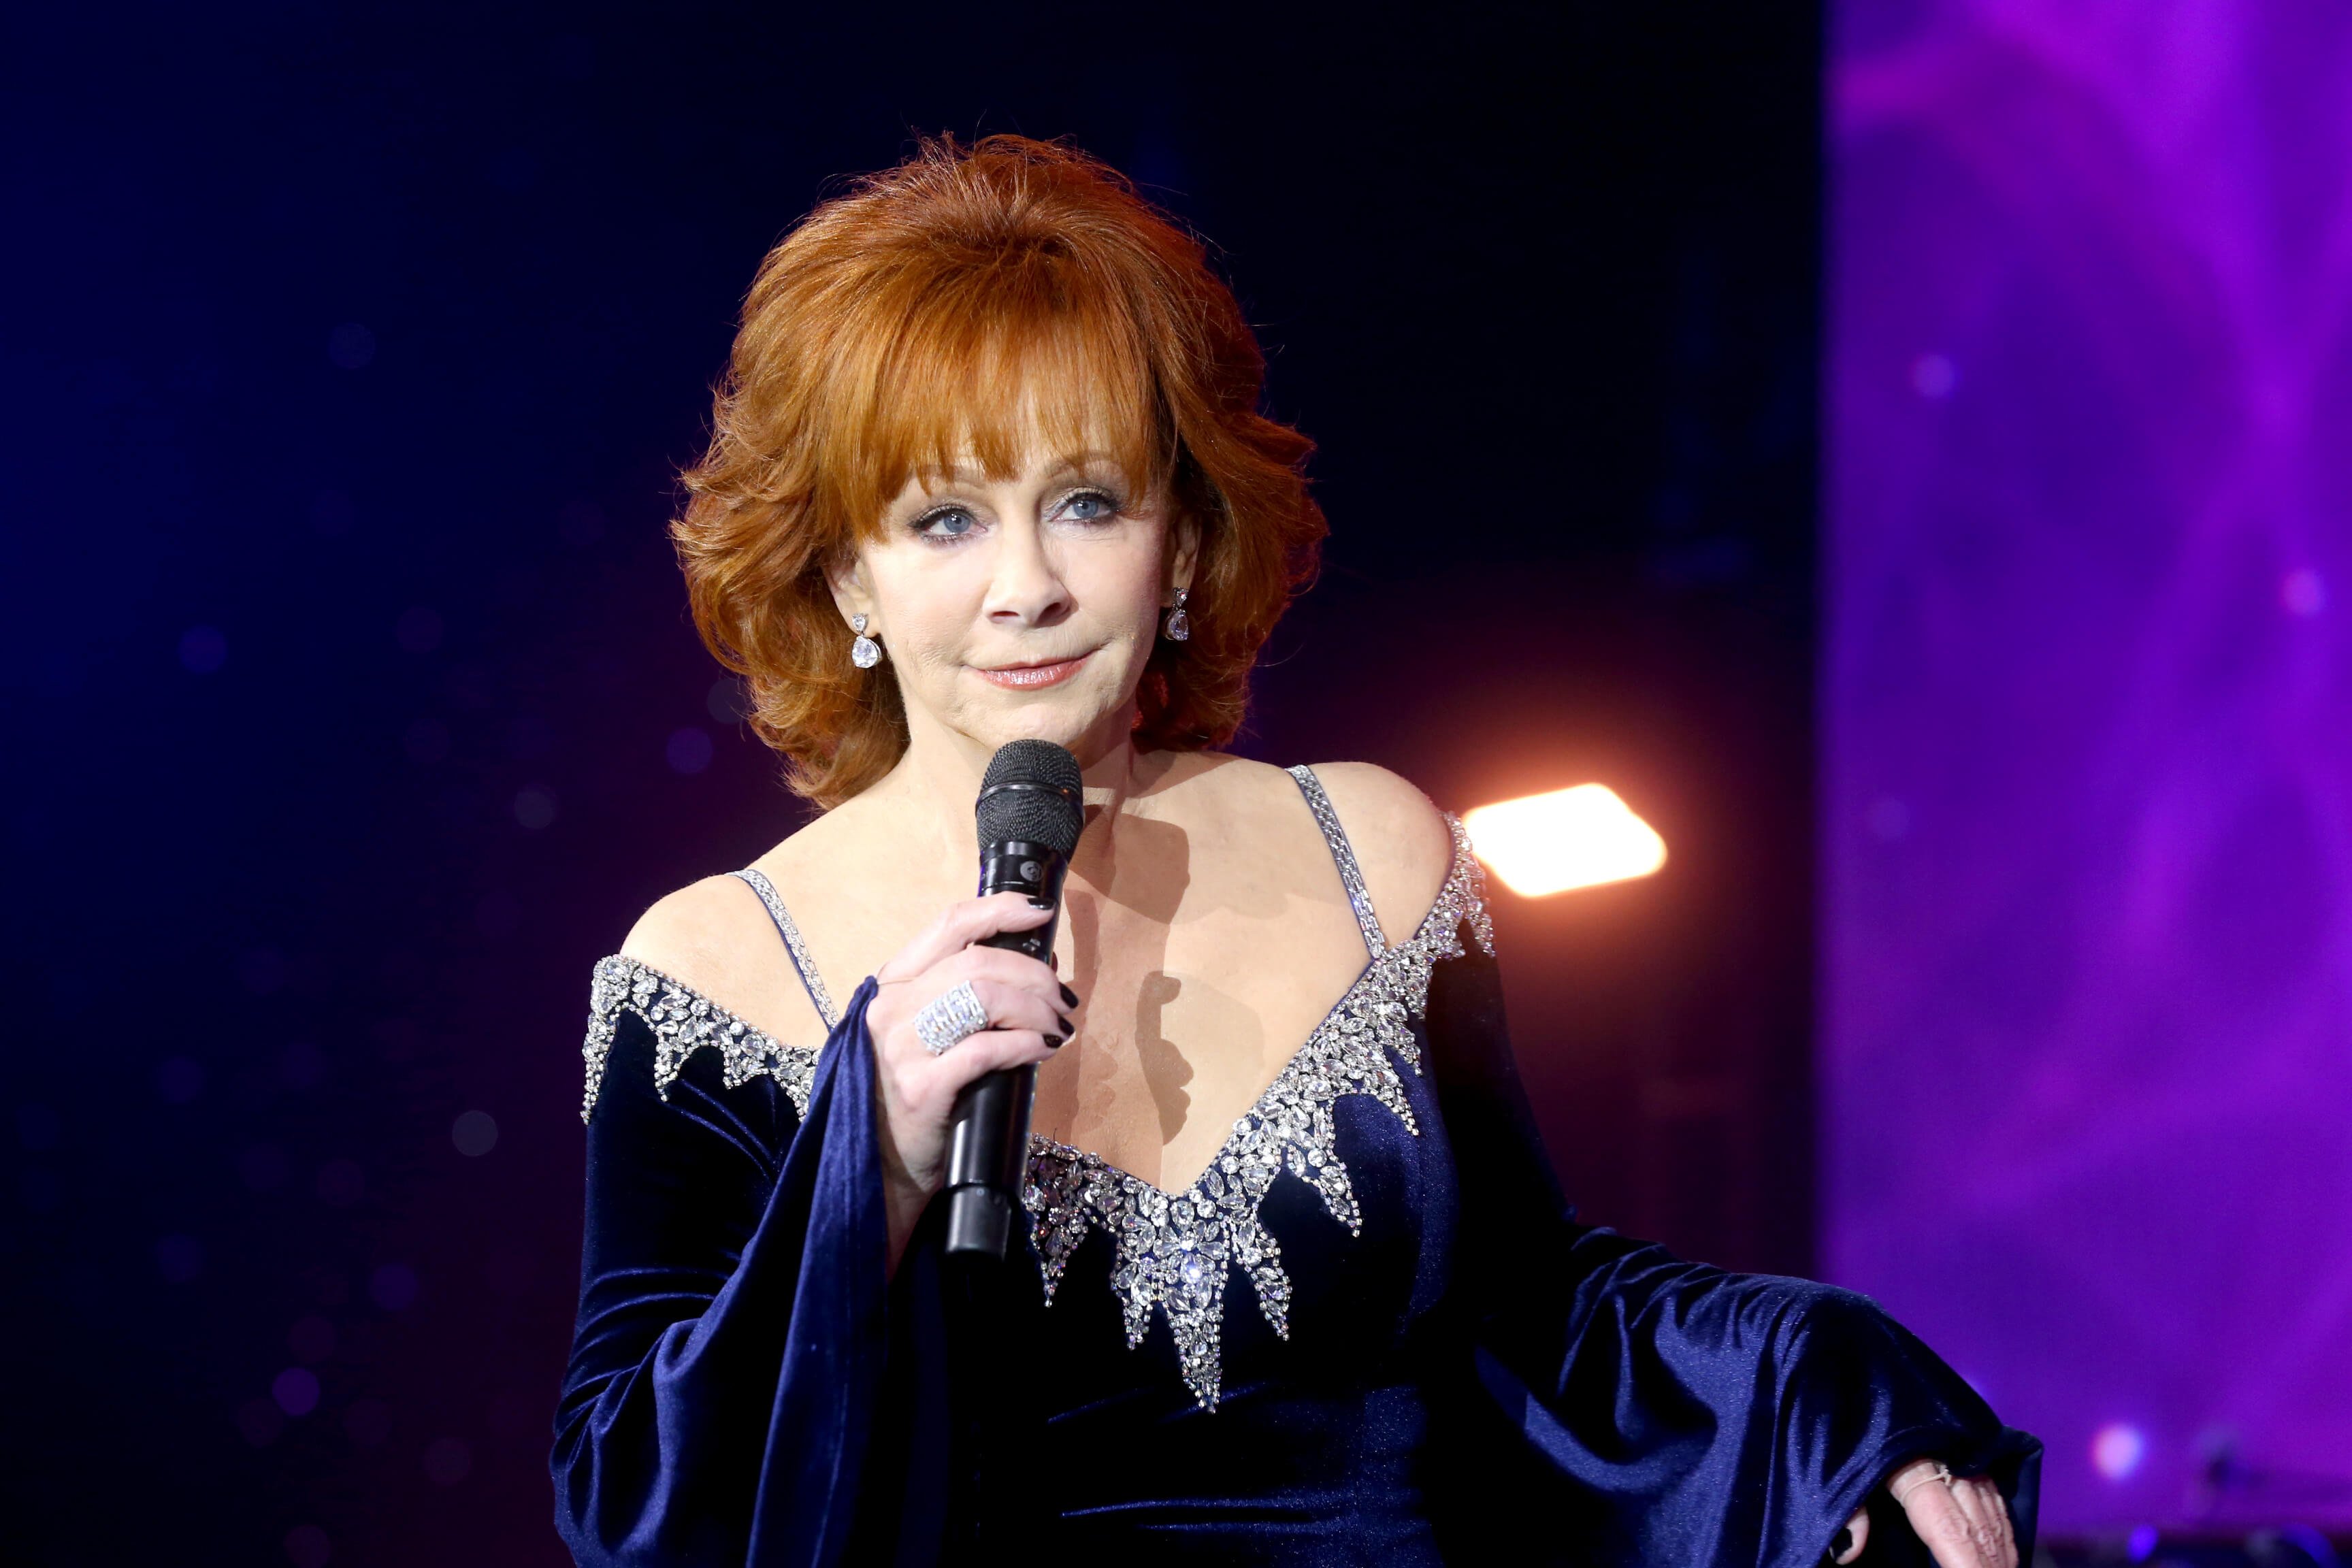 Reba McEntire holds a microphone while wearing a blue -and-silver strapless dress